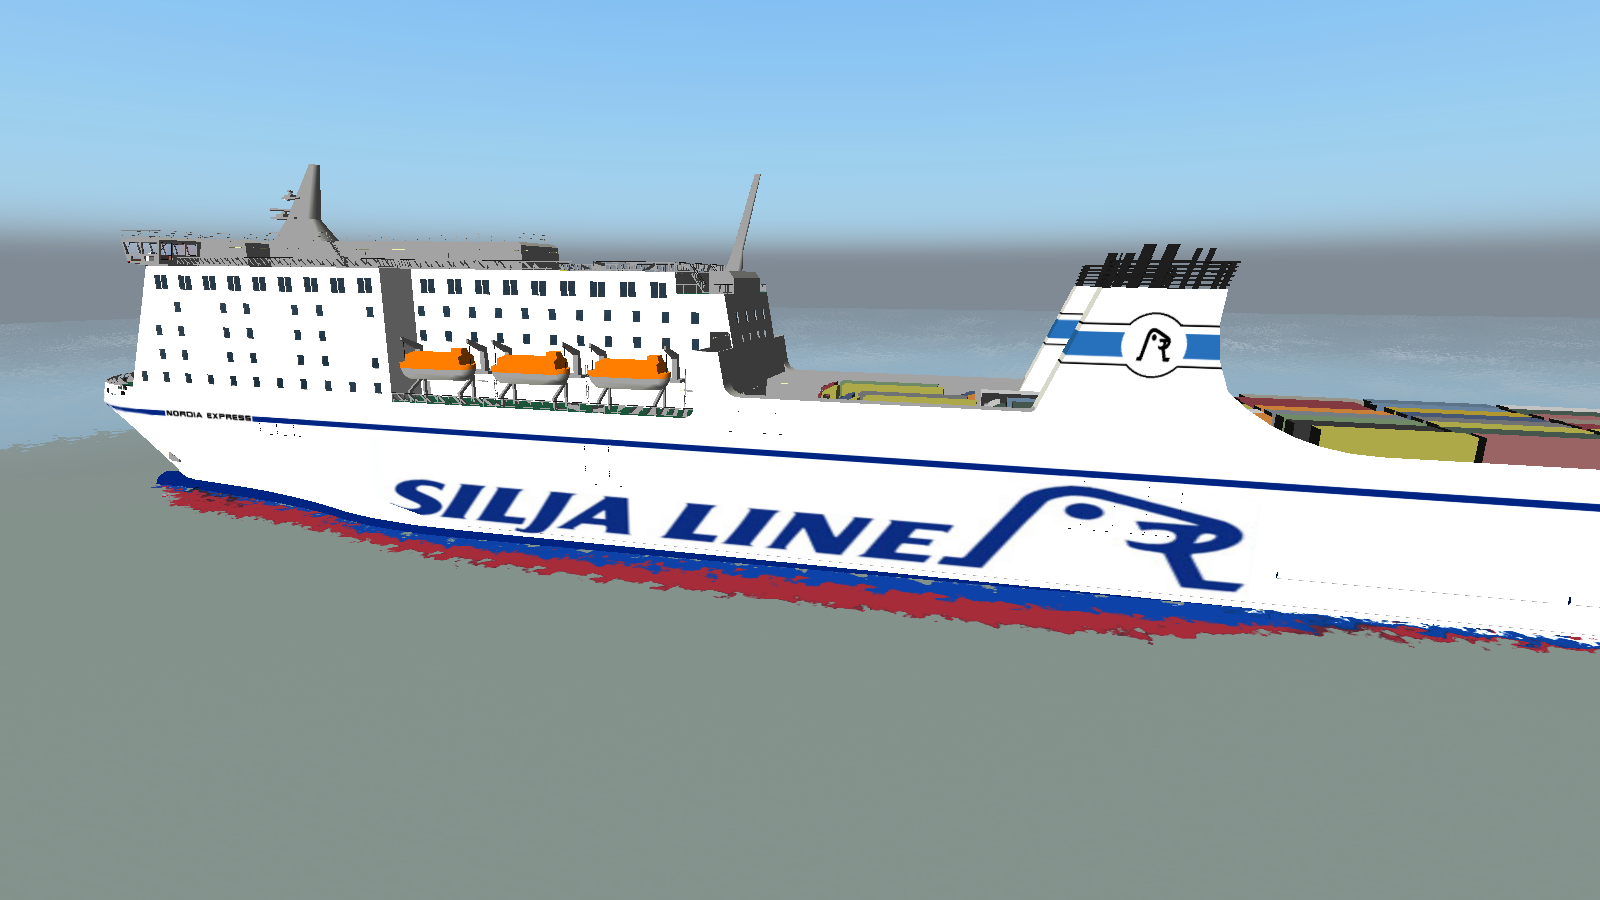 Silja Line skin for the M/V Nordia Express | Rigs of Rods Community